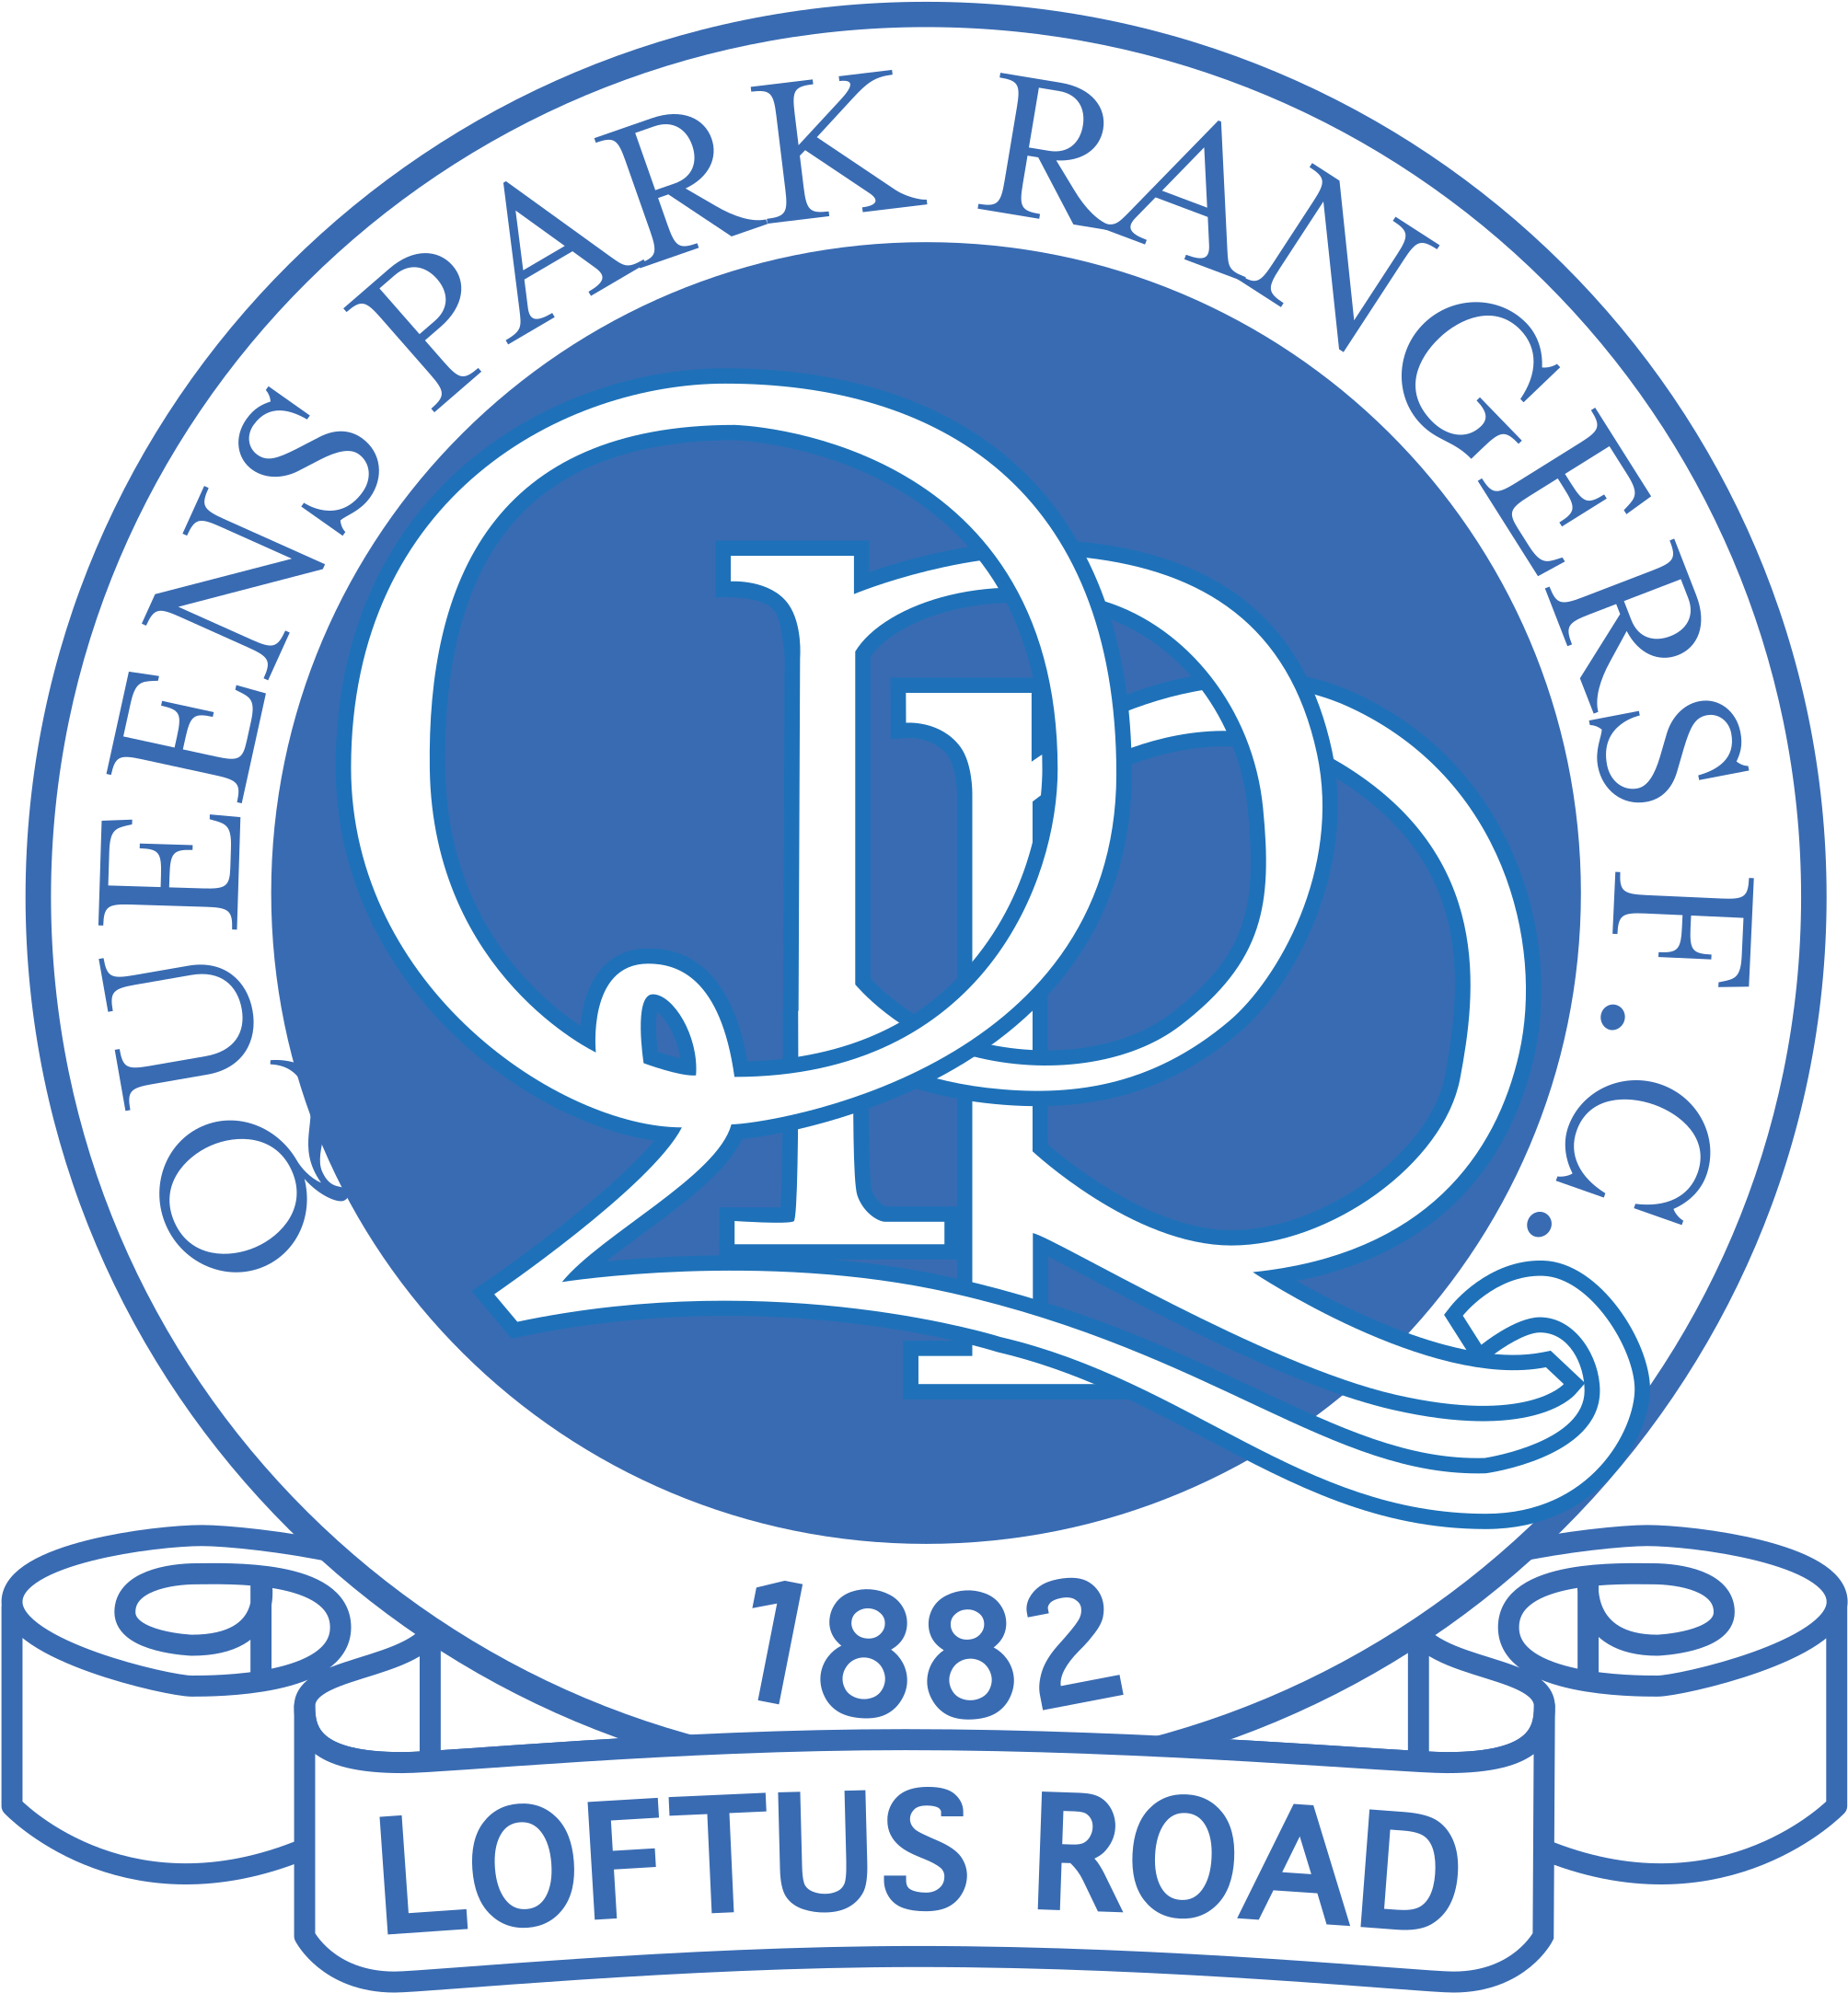 Queens Park Rangers Fc Logo Black And White - United States Foreign Service (2400x2400)